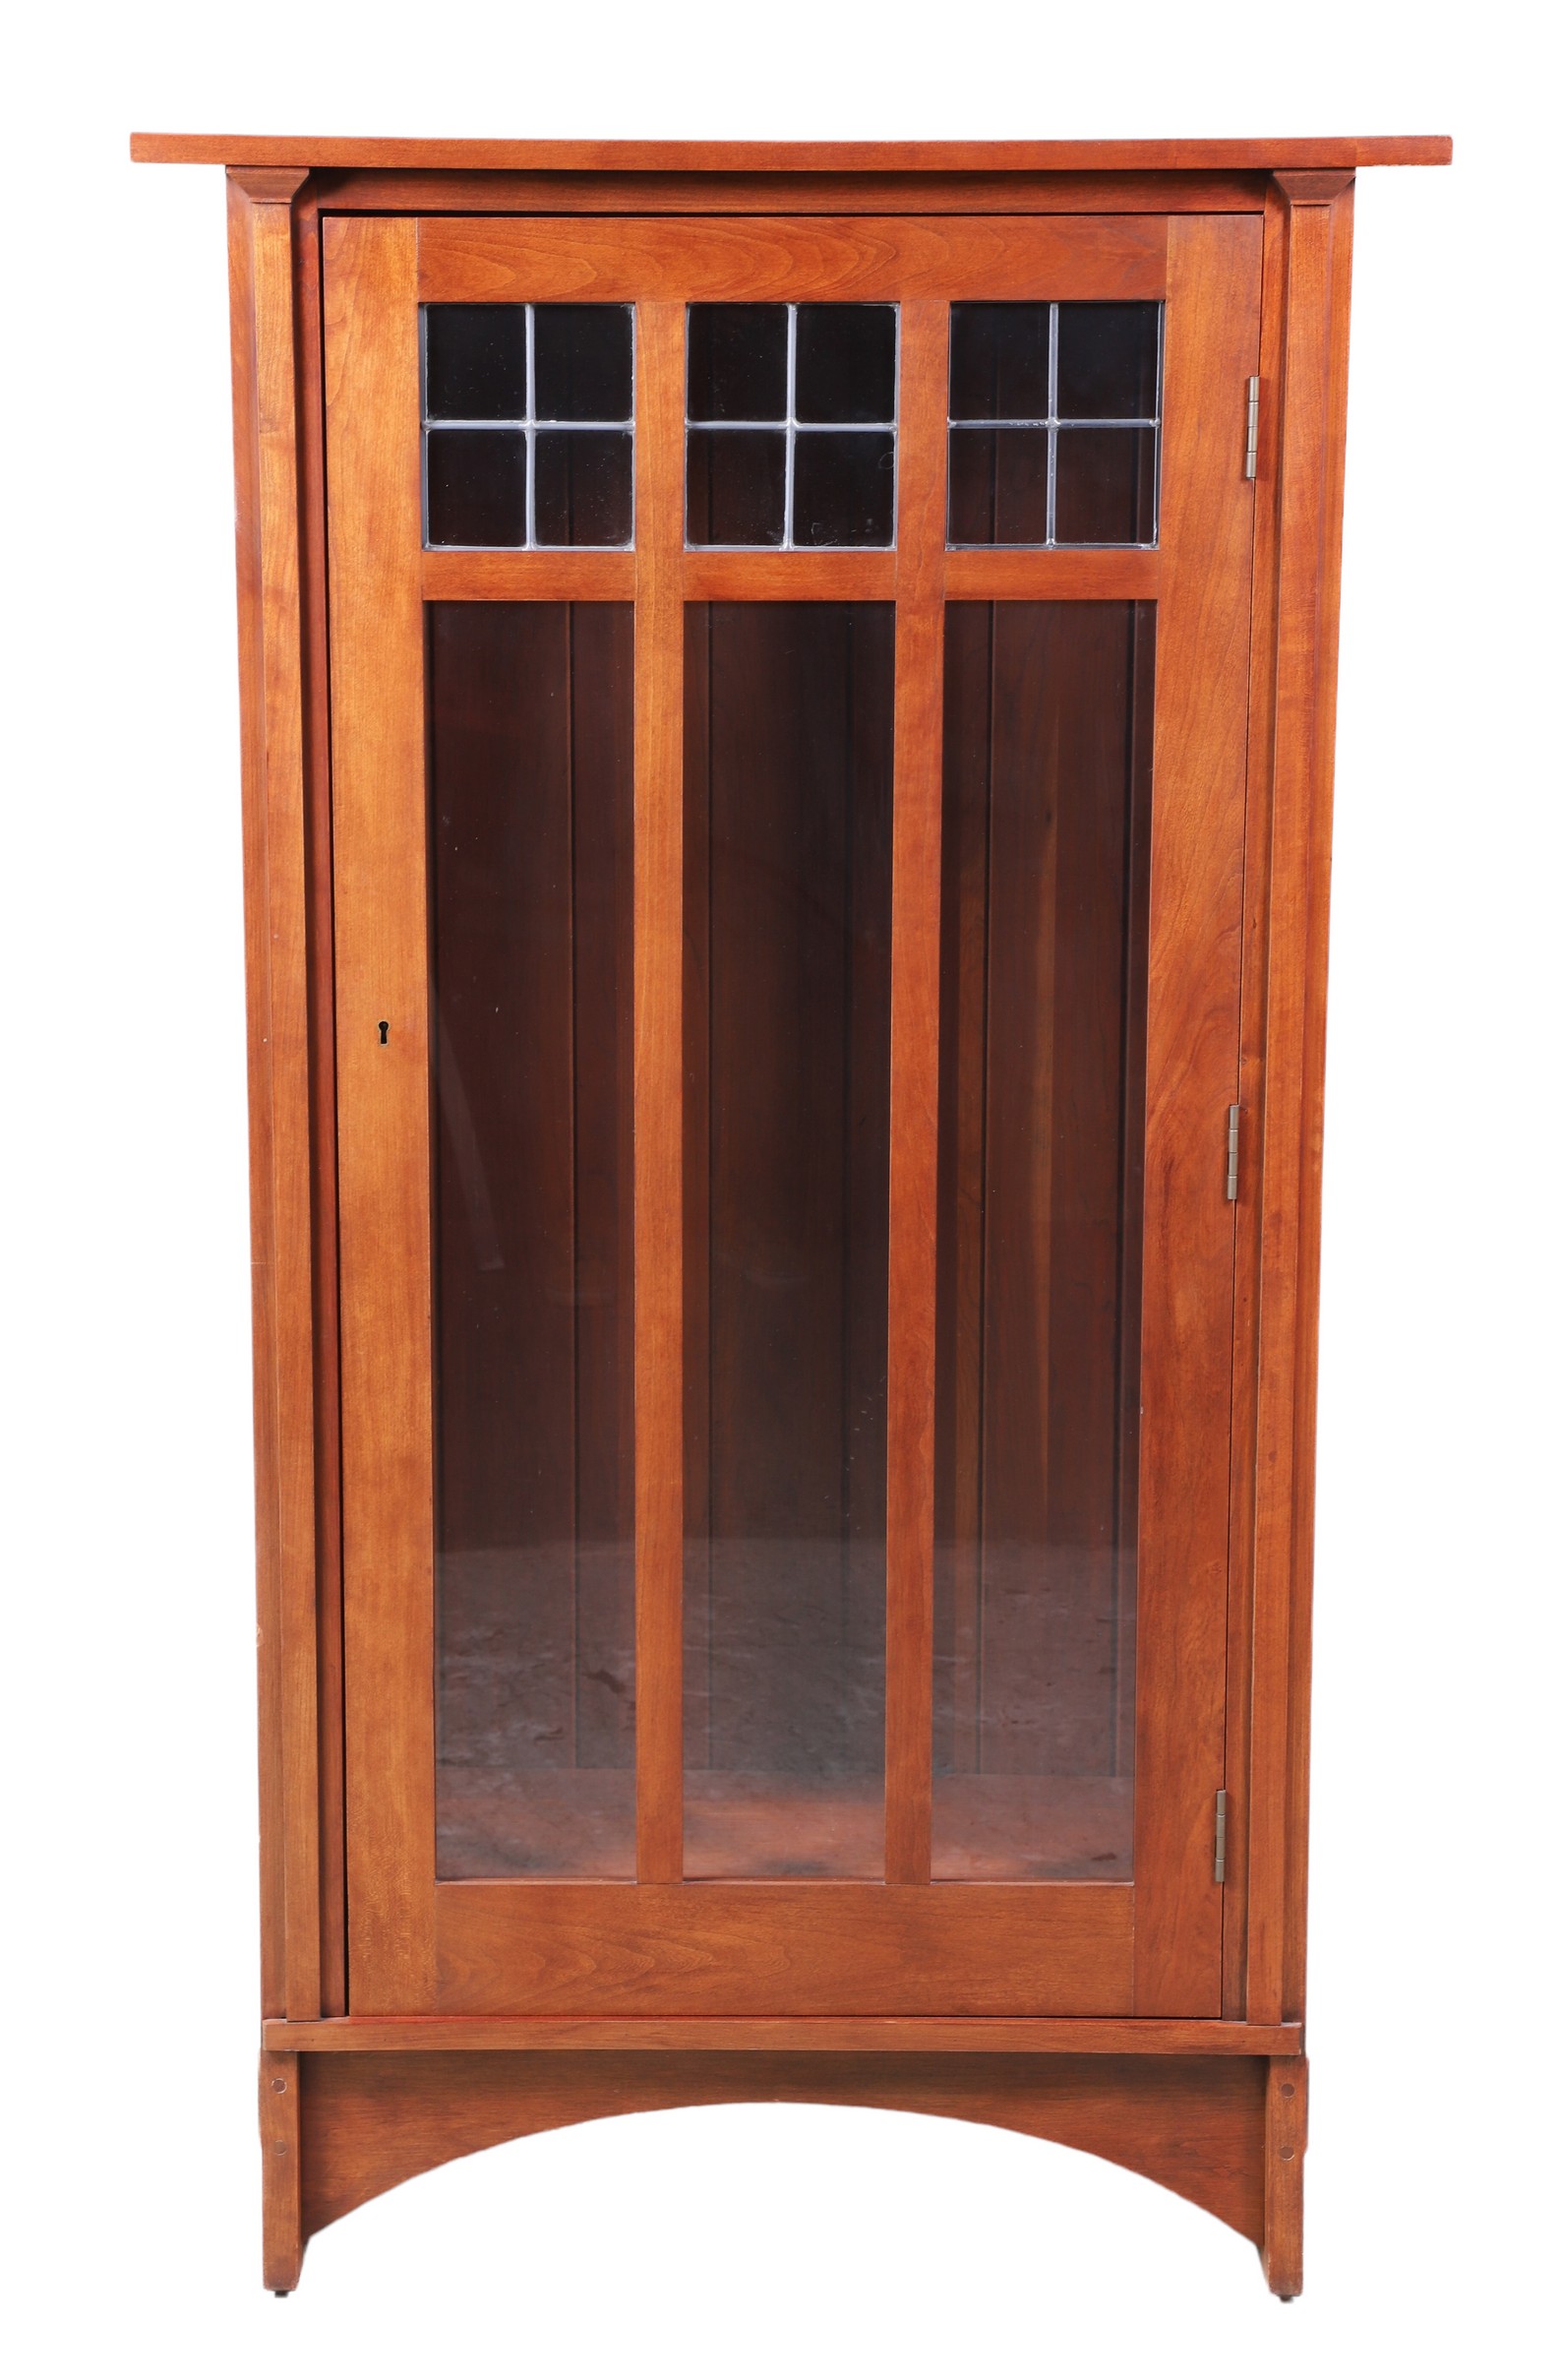 Stickley Mission style cherry one